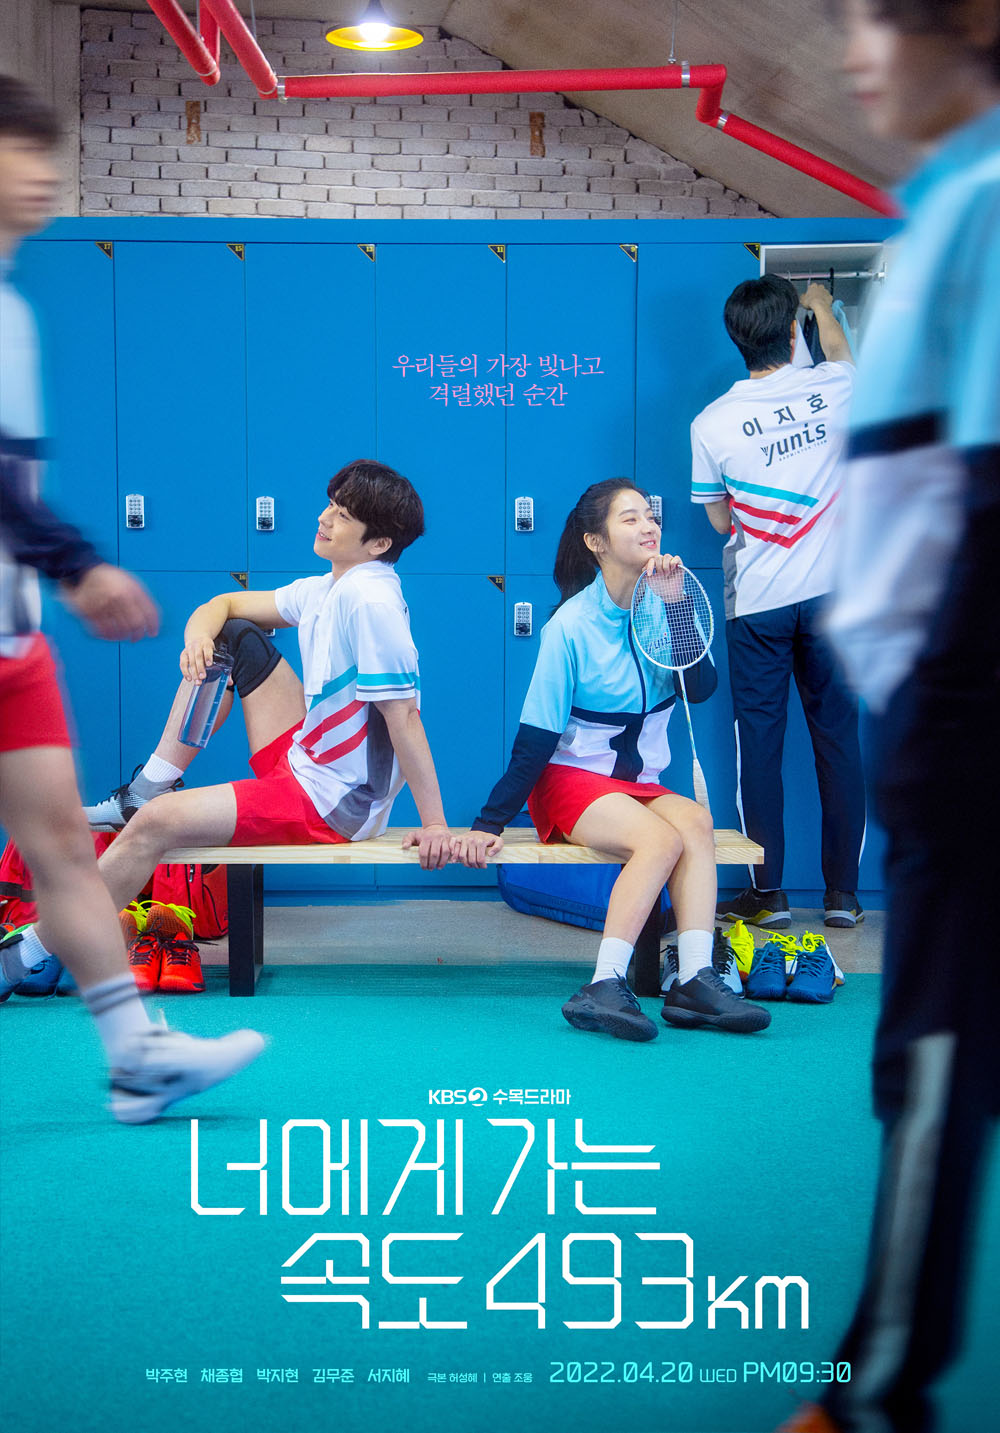 Park Joo-hyun and Chae Jong-hyeop matched for badminton and love in KBS’s Going to You at a Speed of 493km